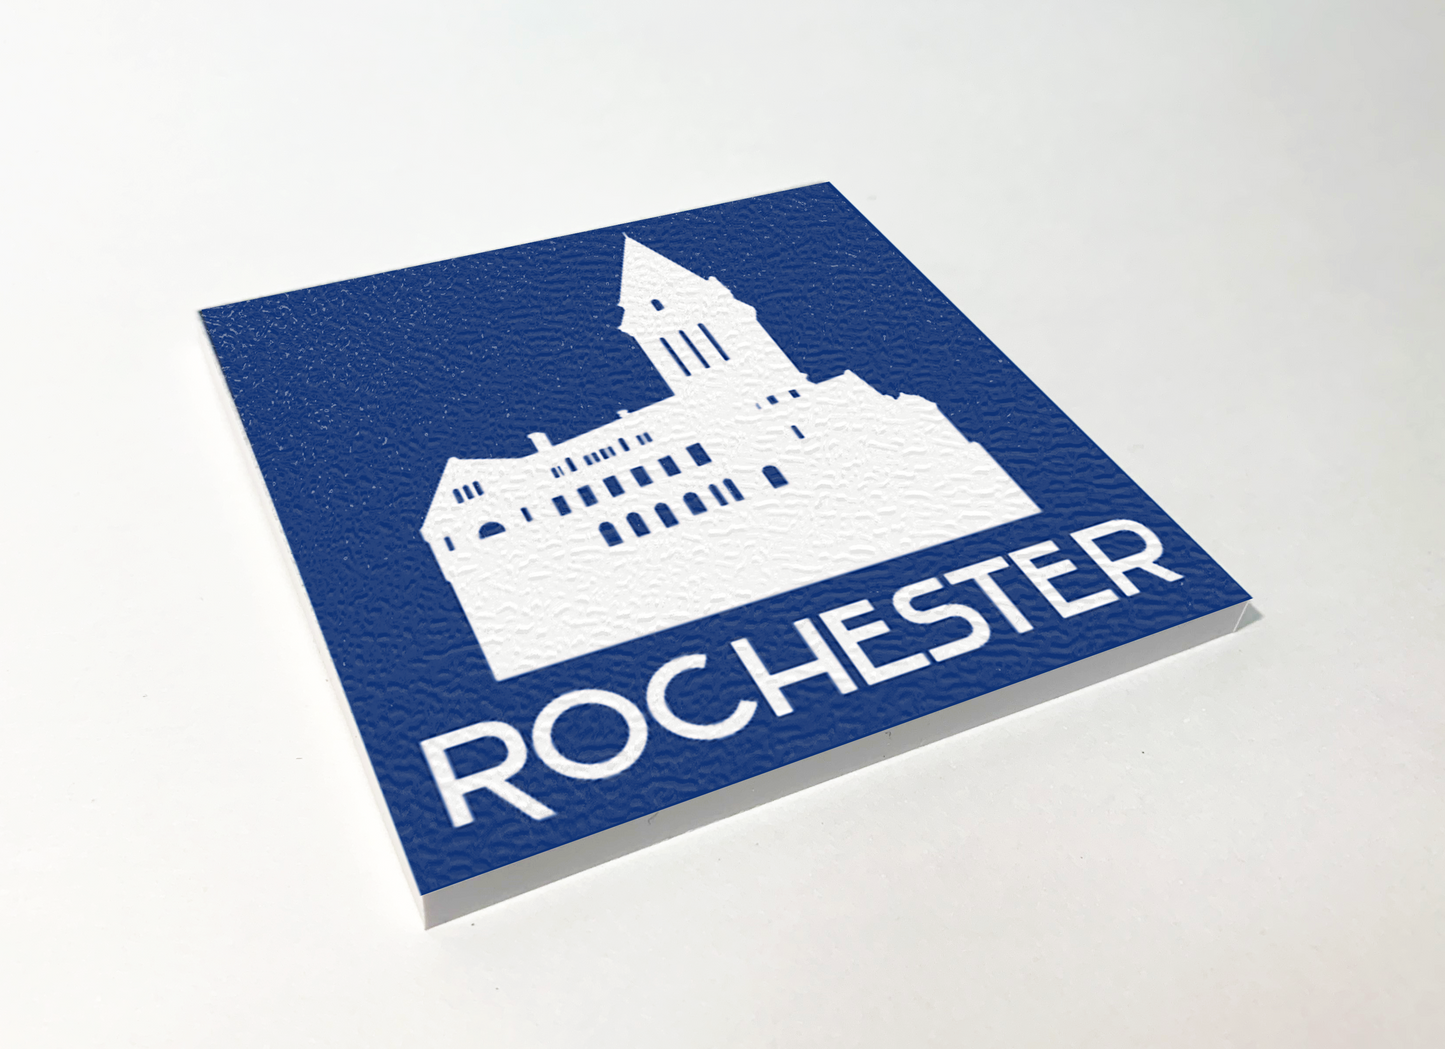 Rochester City Hall White ABS Plastic Coaster 4 Pack Designed and Handcrafted in Buffalo NY